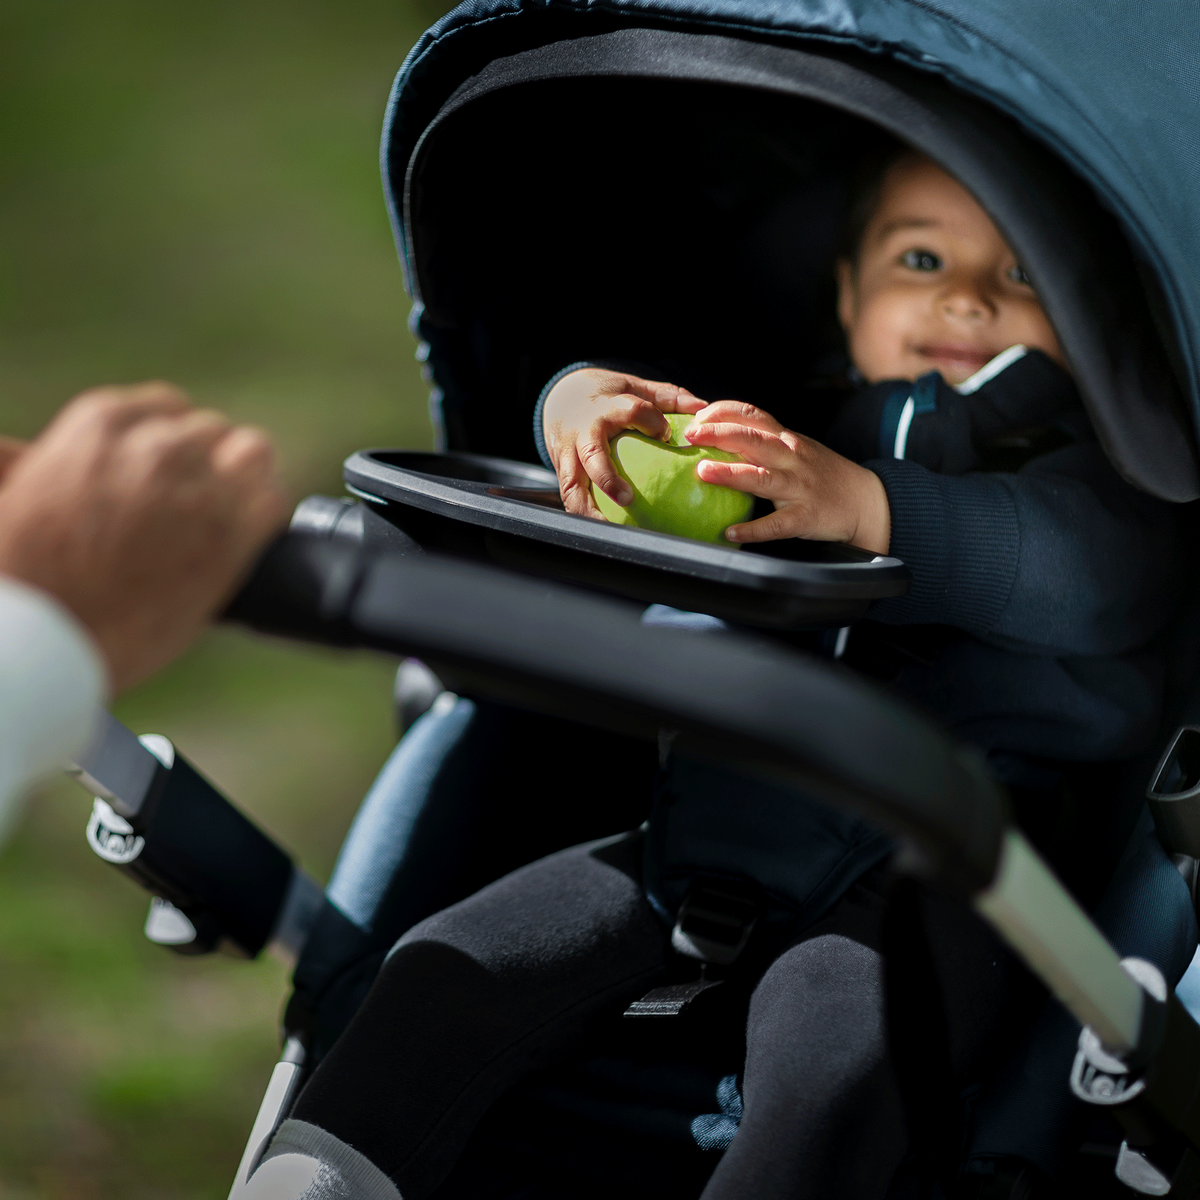 A close-up of a toddler holding an apple inside the Thule Sleek baby stroller.